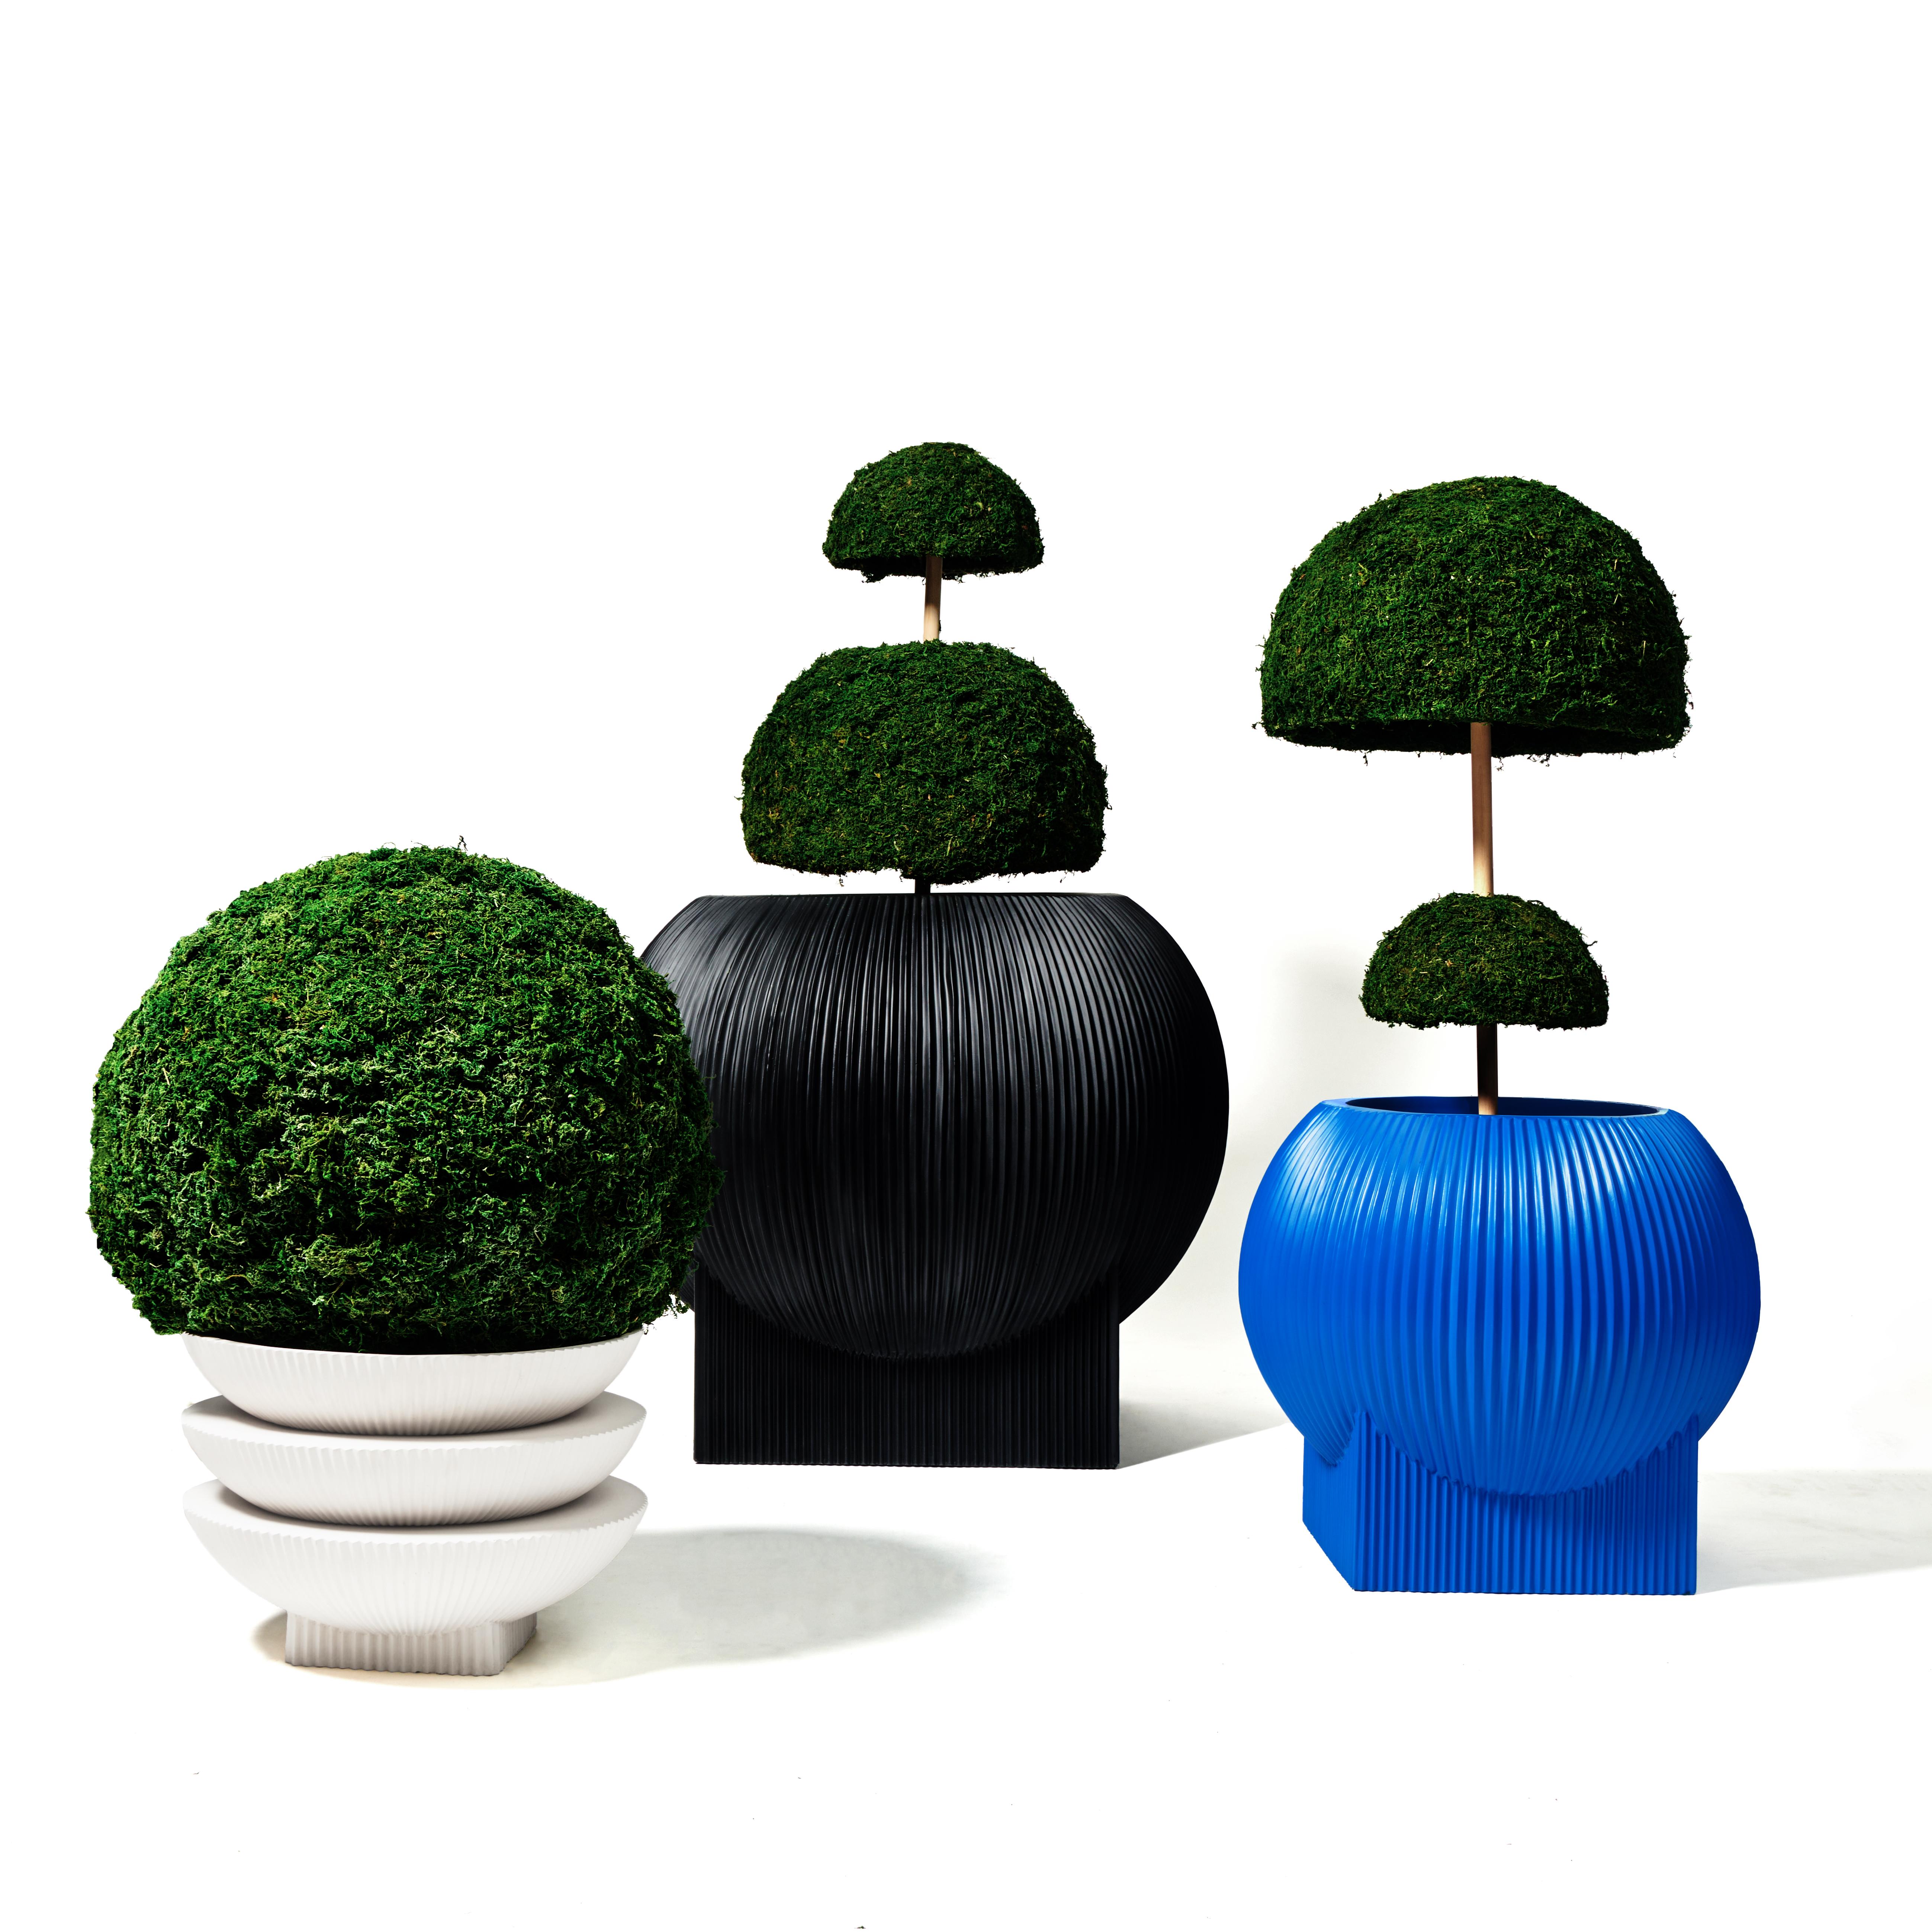 Oversize Flat Blob Planter 'Black' by TFM, Represented by Tuleste Factory 1